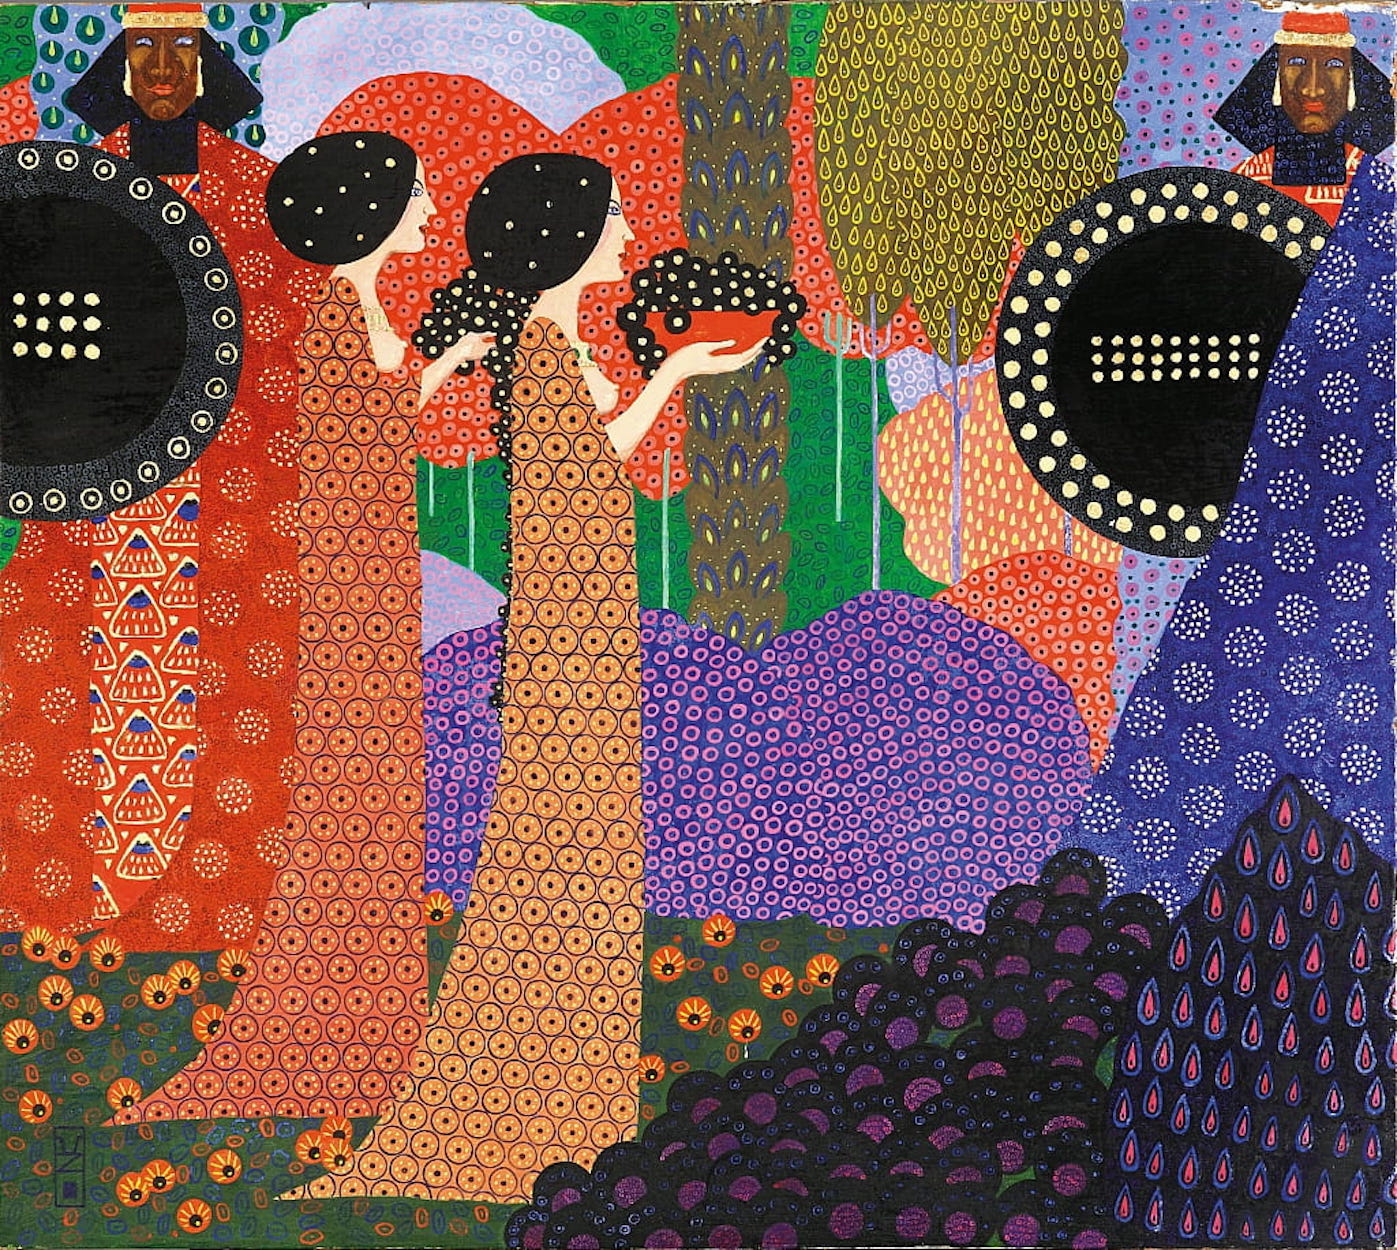 One Thousand and One Nights by Vittorio Zecchin - 1914 - 58 x 65 cm private collection